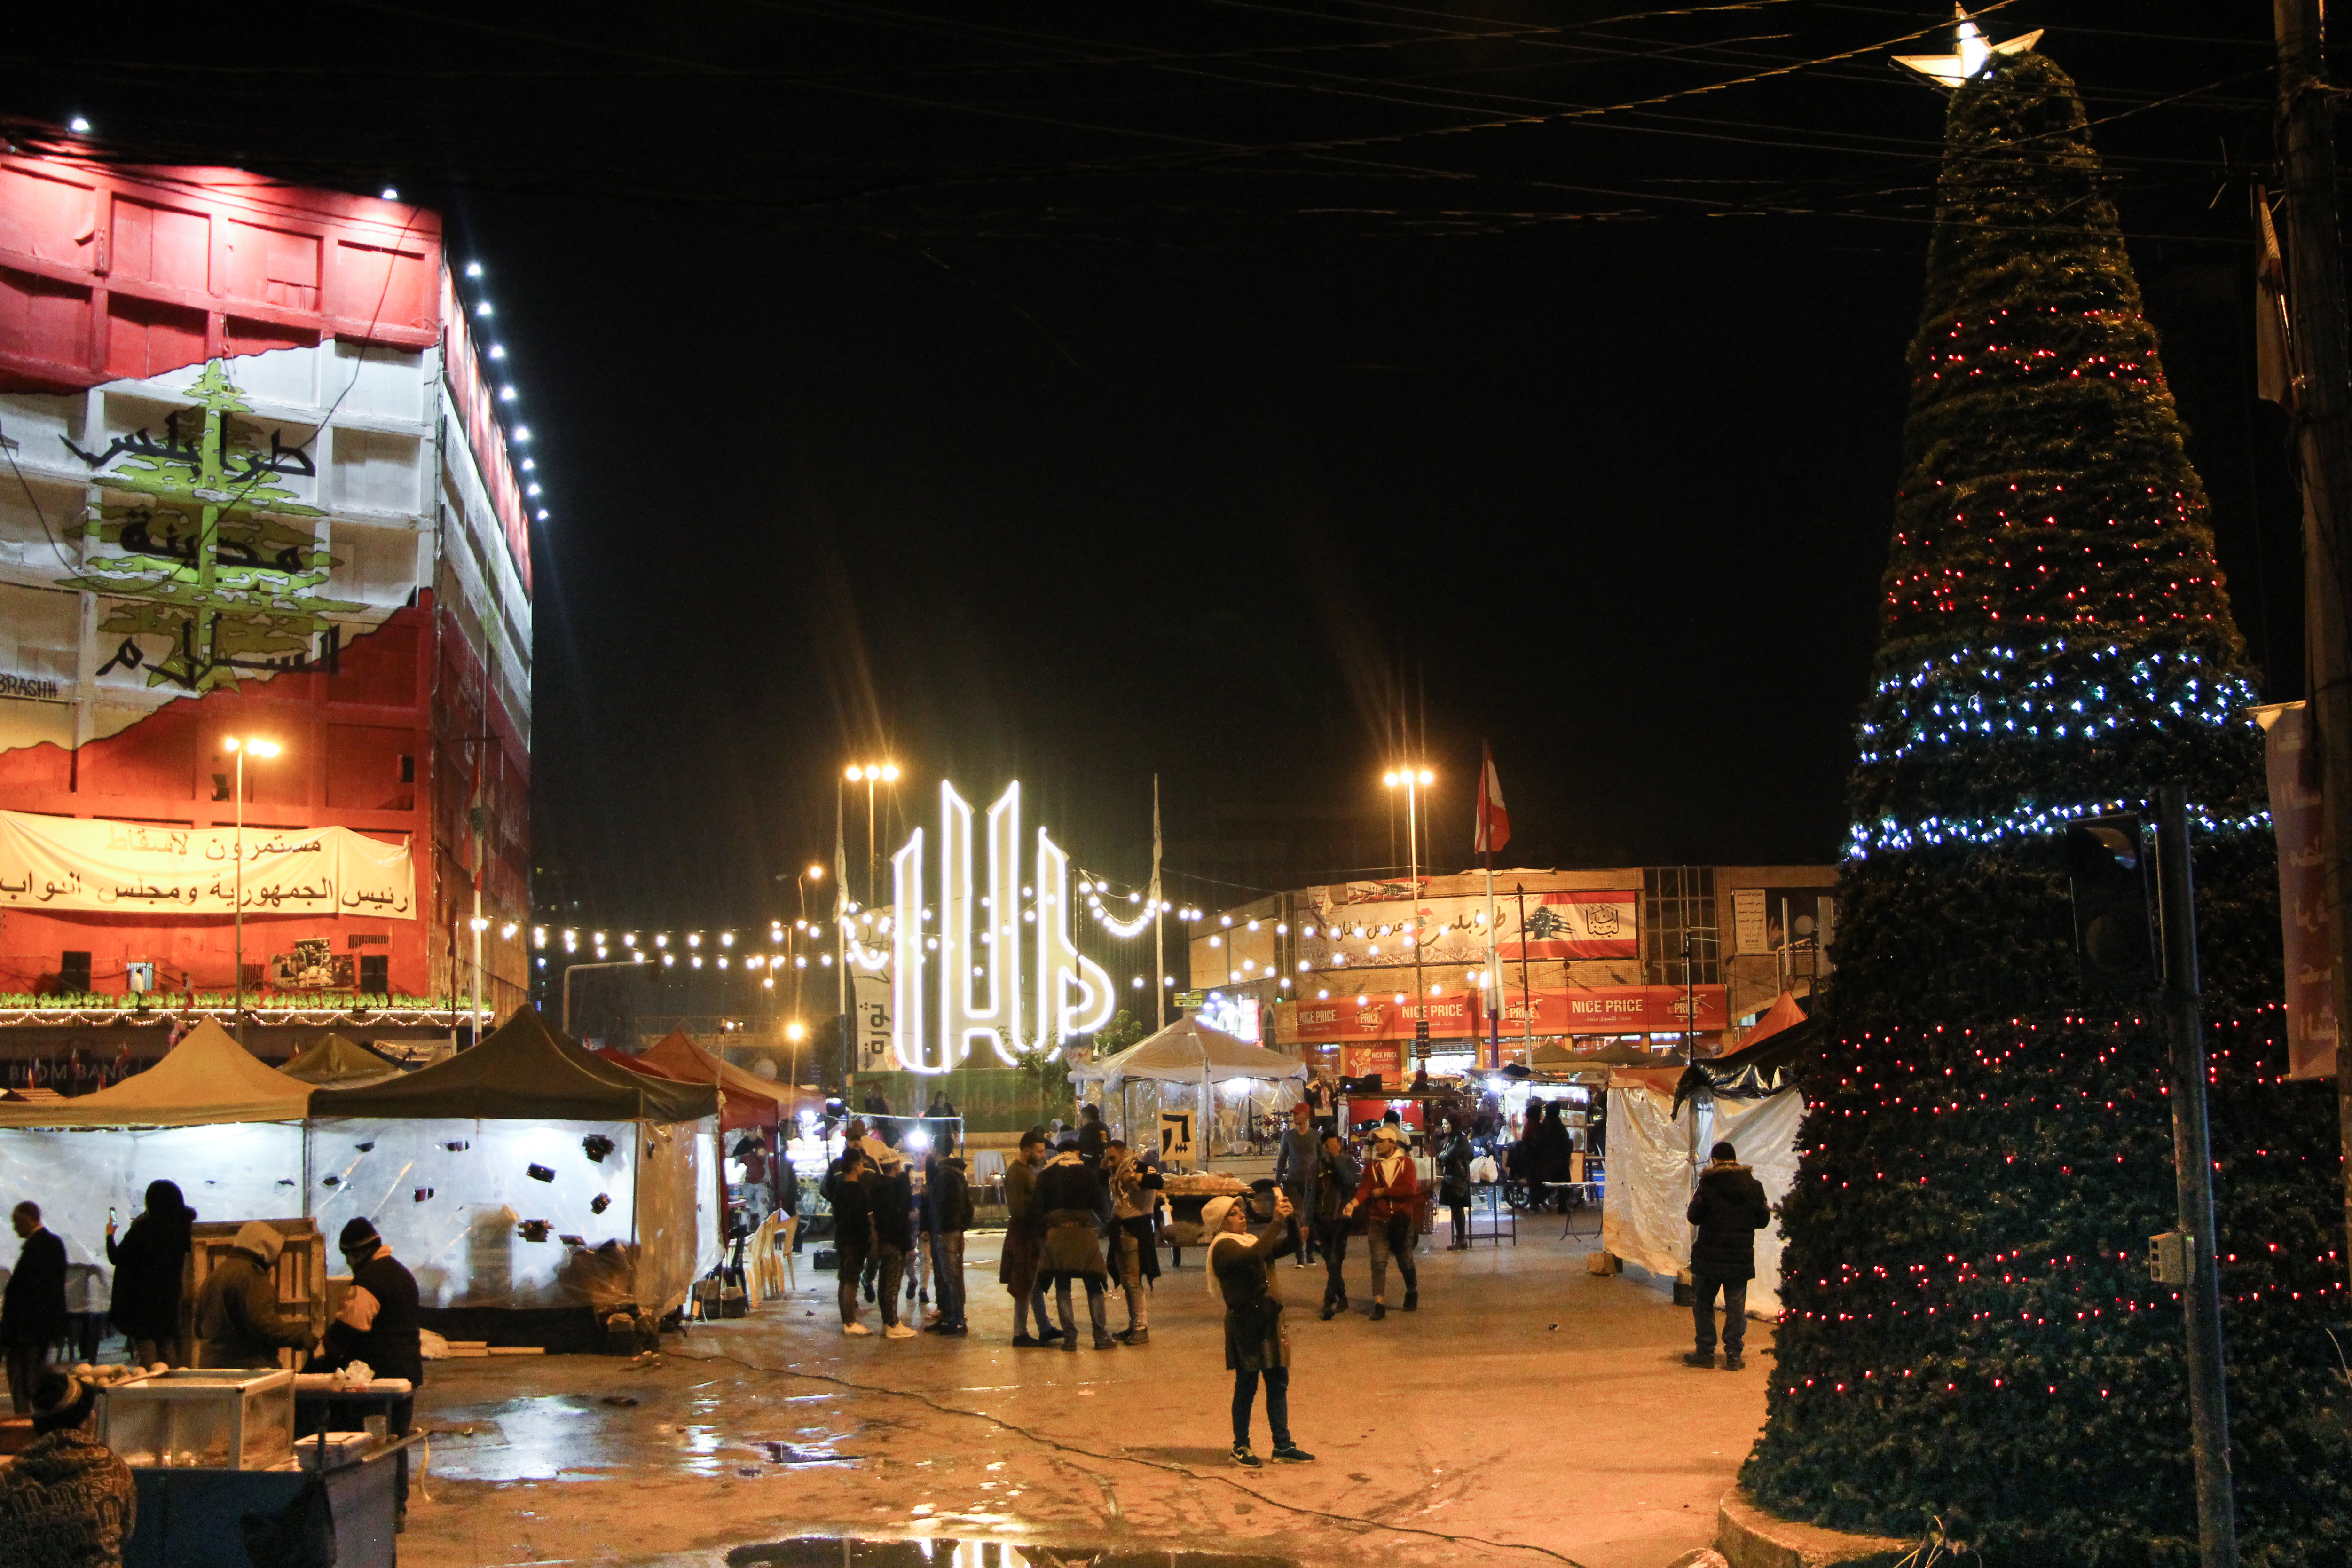 Christmas tree on Sahat an-Nour Square in the north Lebanon city of Tripoli (photo: Hanna Resch)